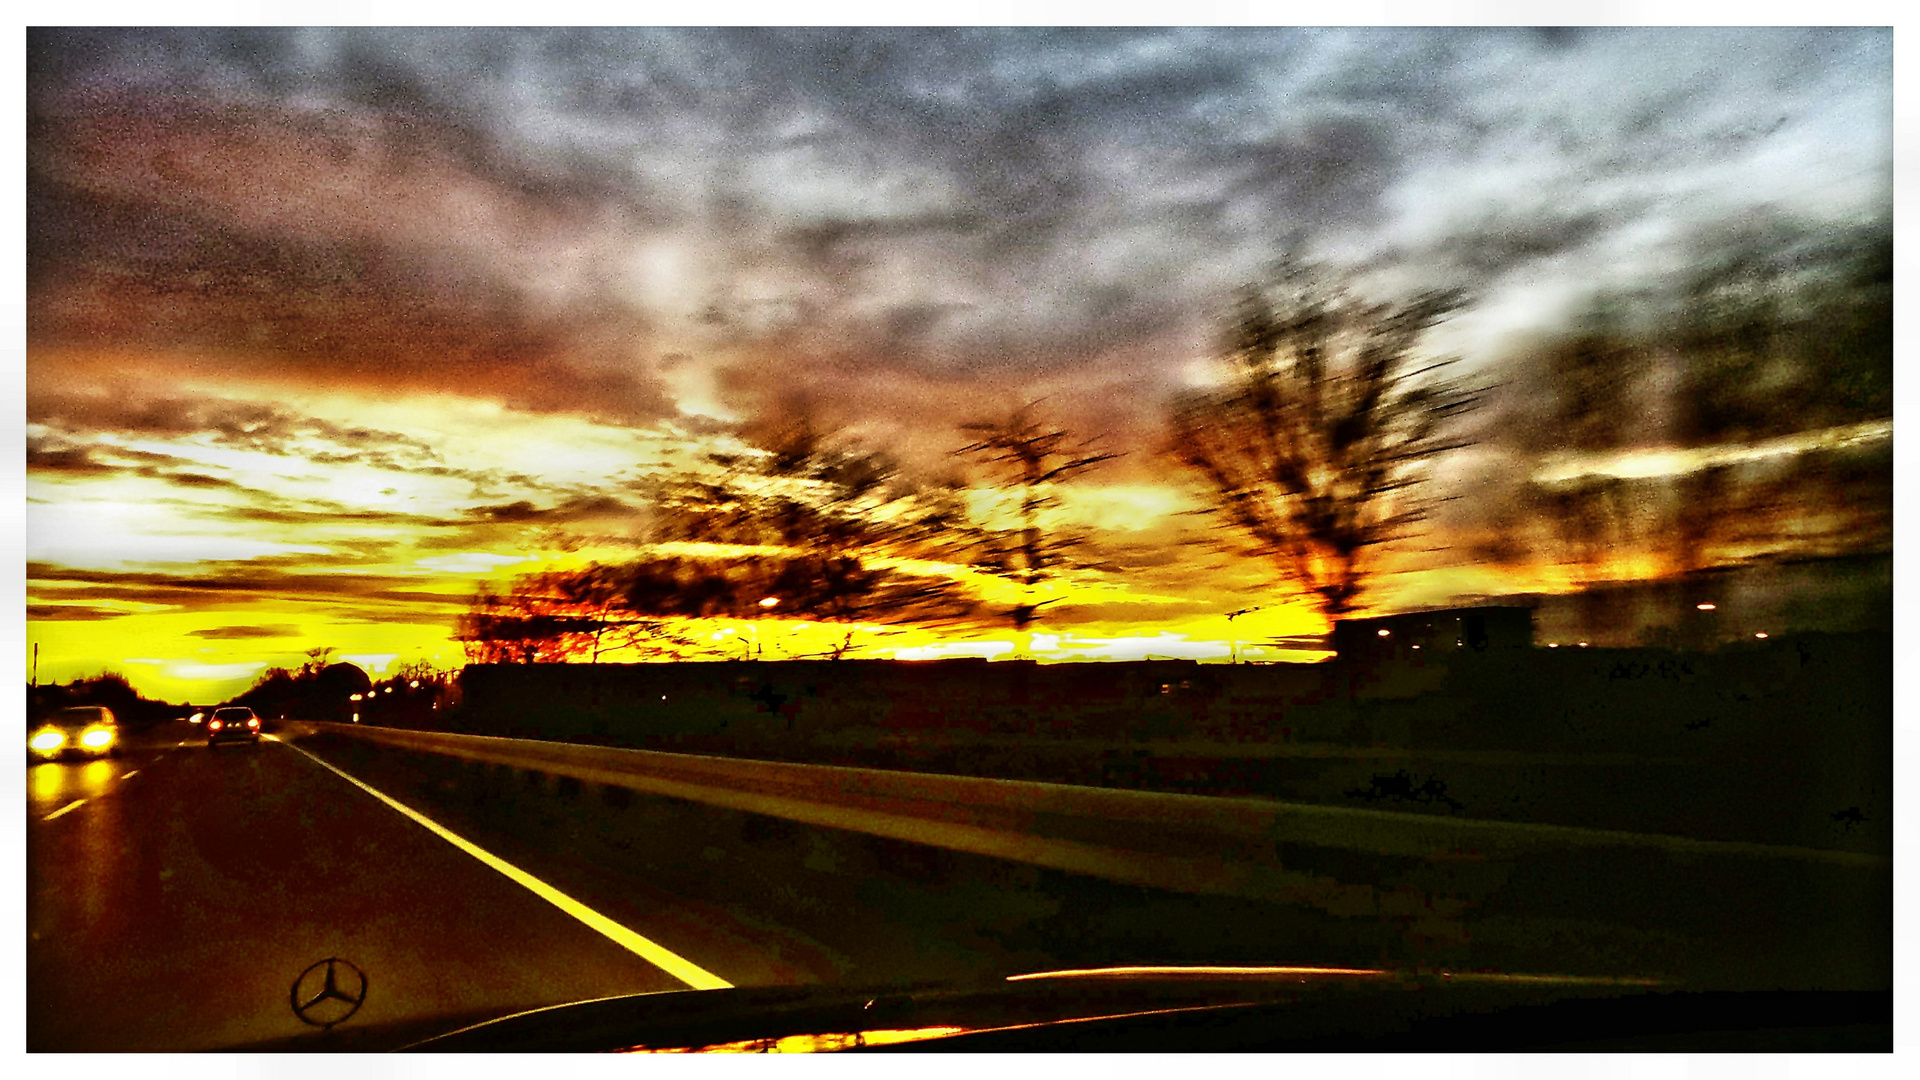 driving home...